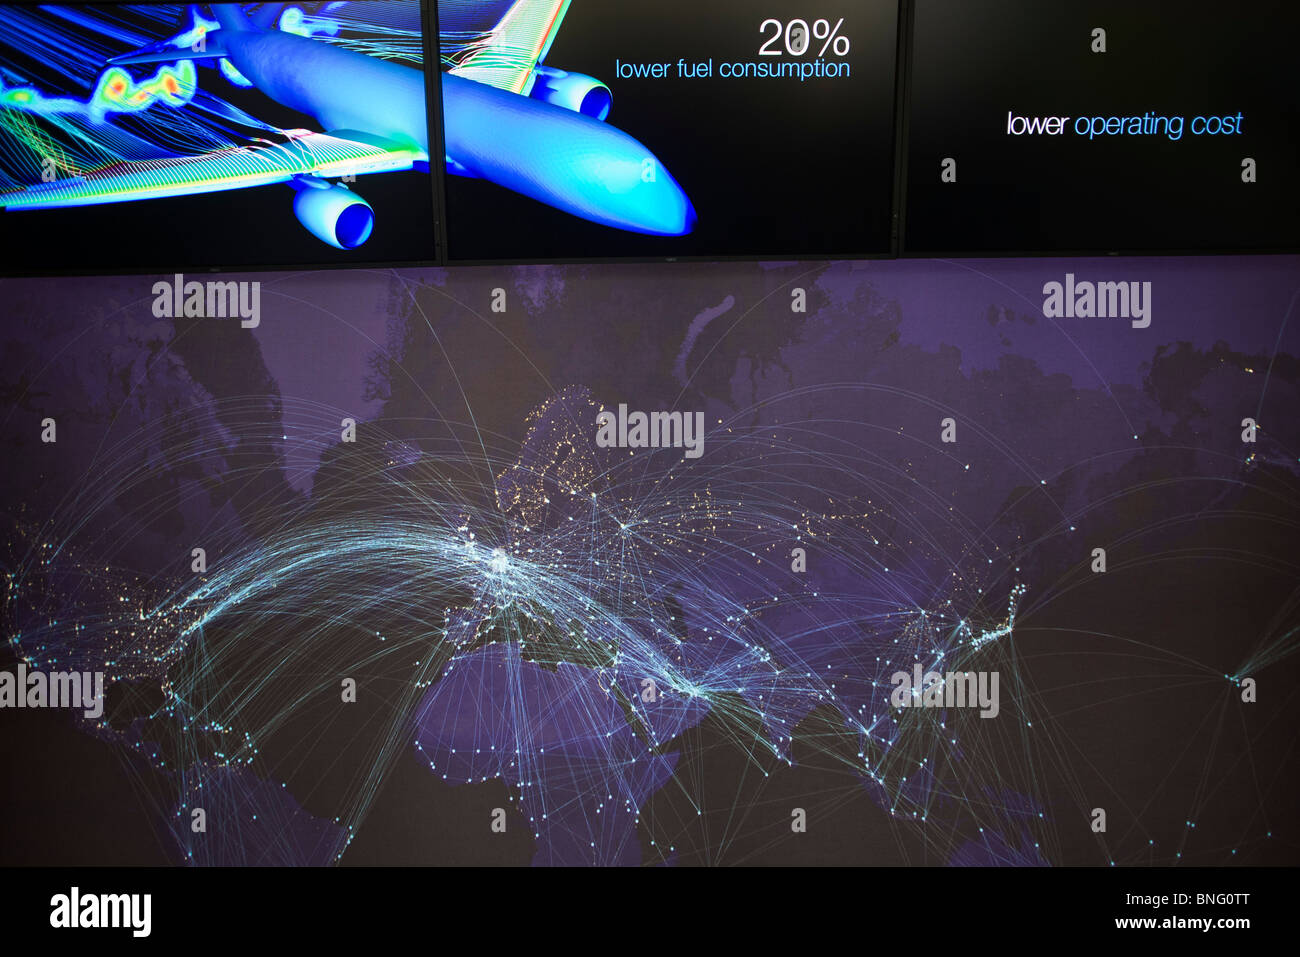 Boeing corporate global map and economy consumption statistics in Farnborough Airshow chalet Stock Photo